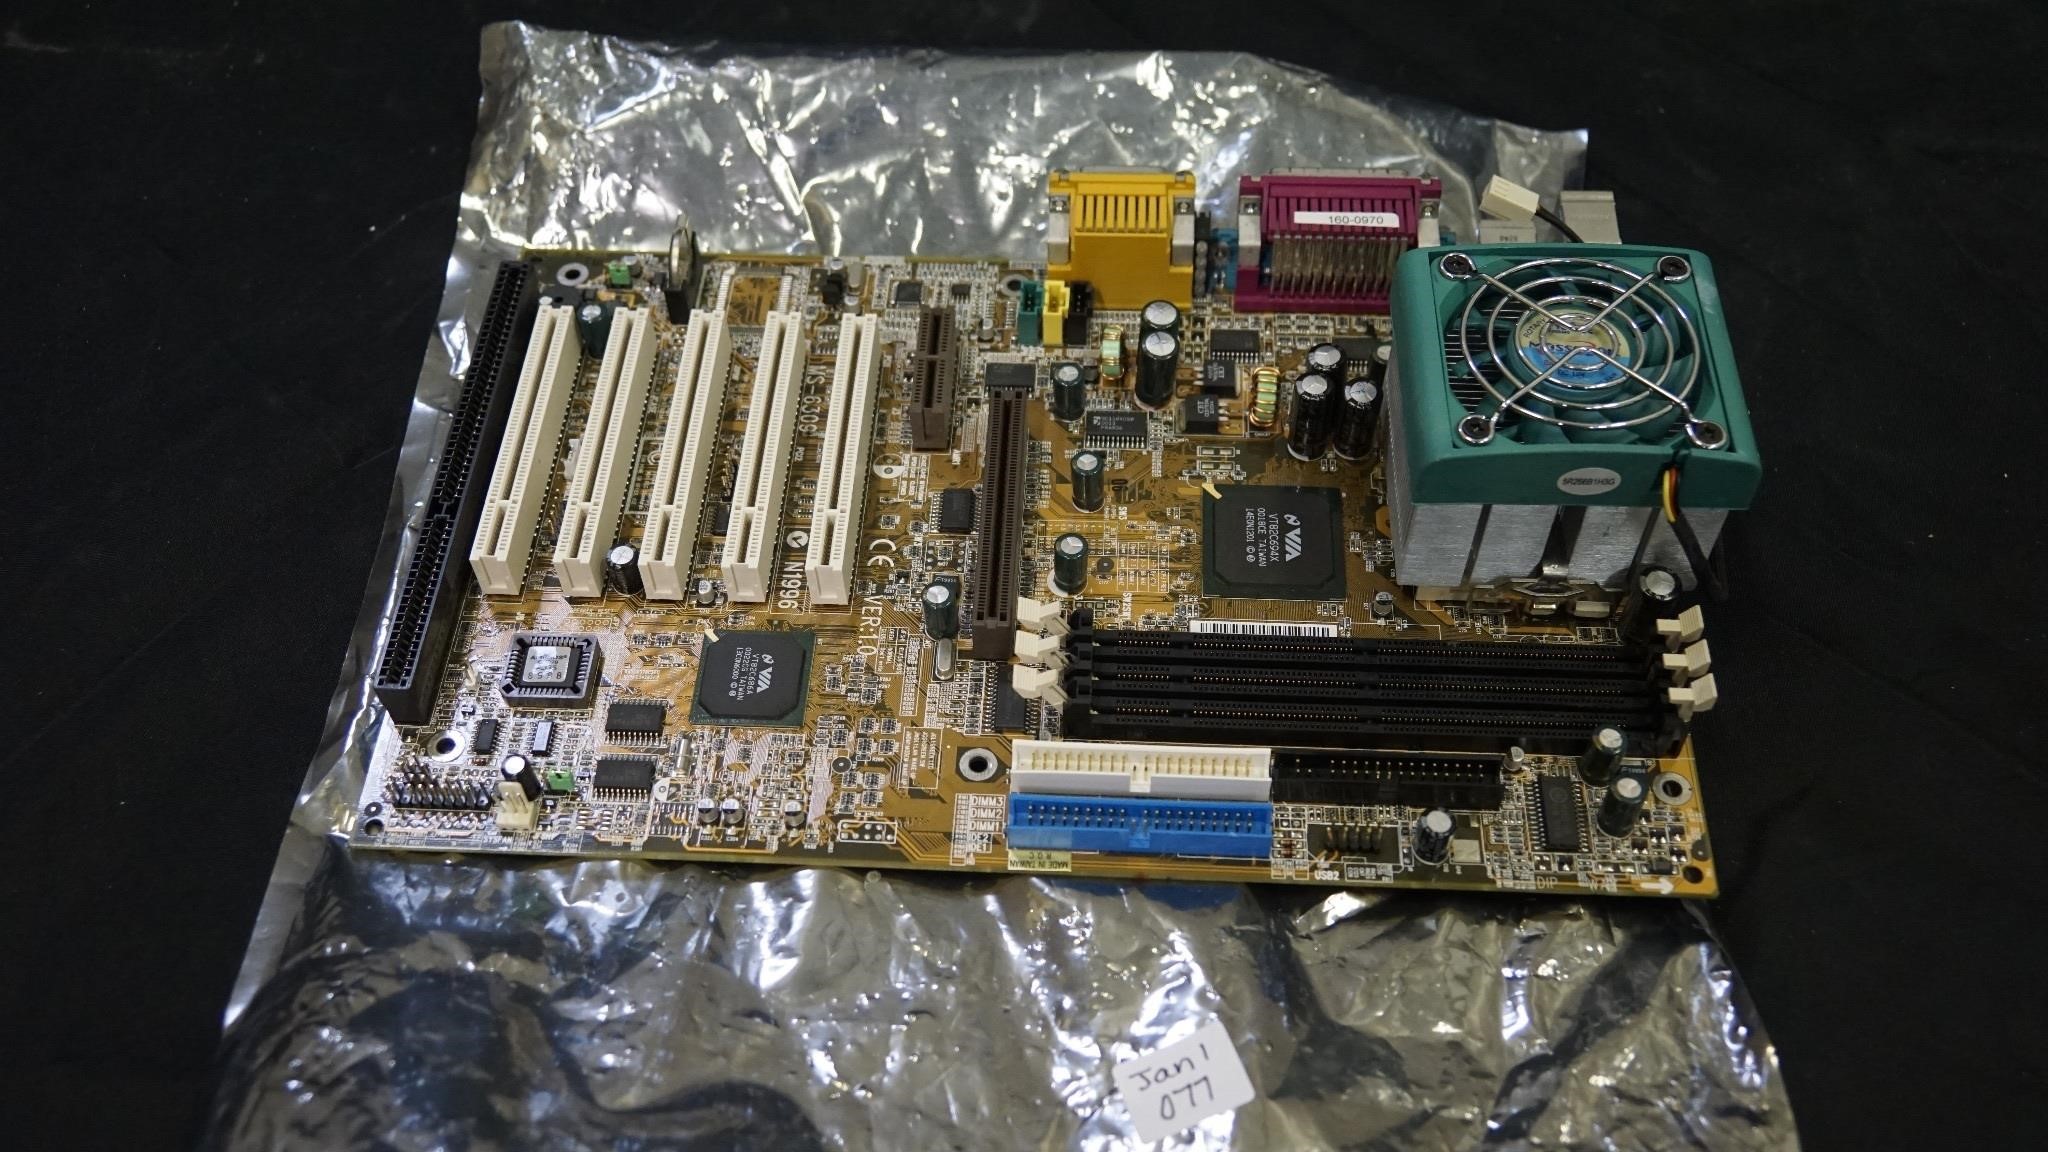 Older style PC motherboard.